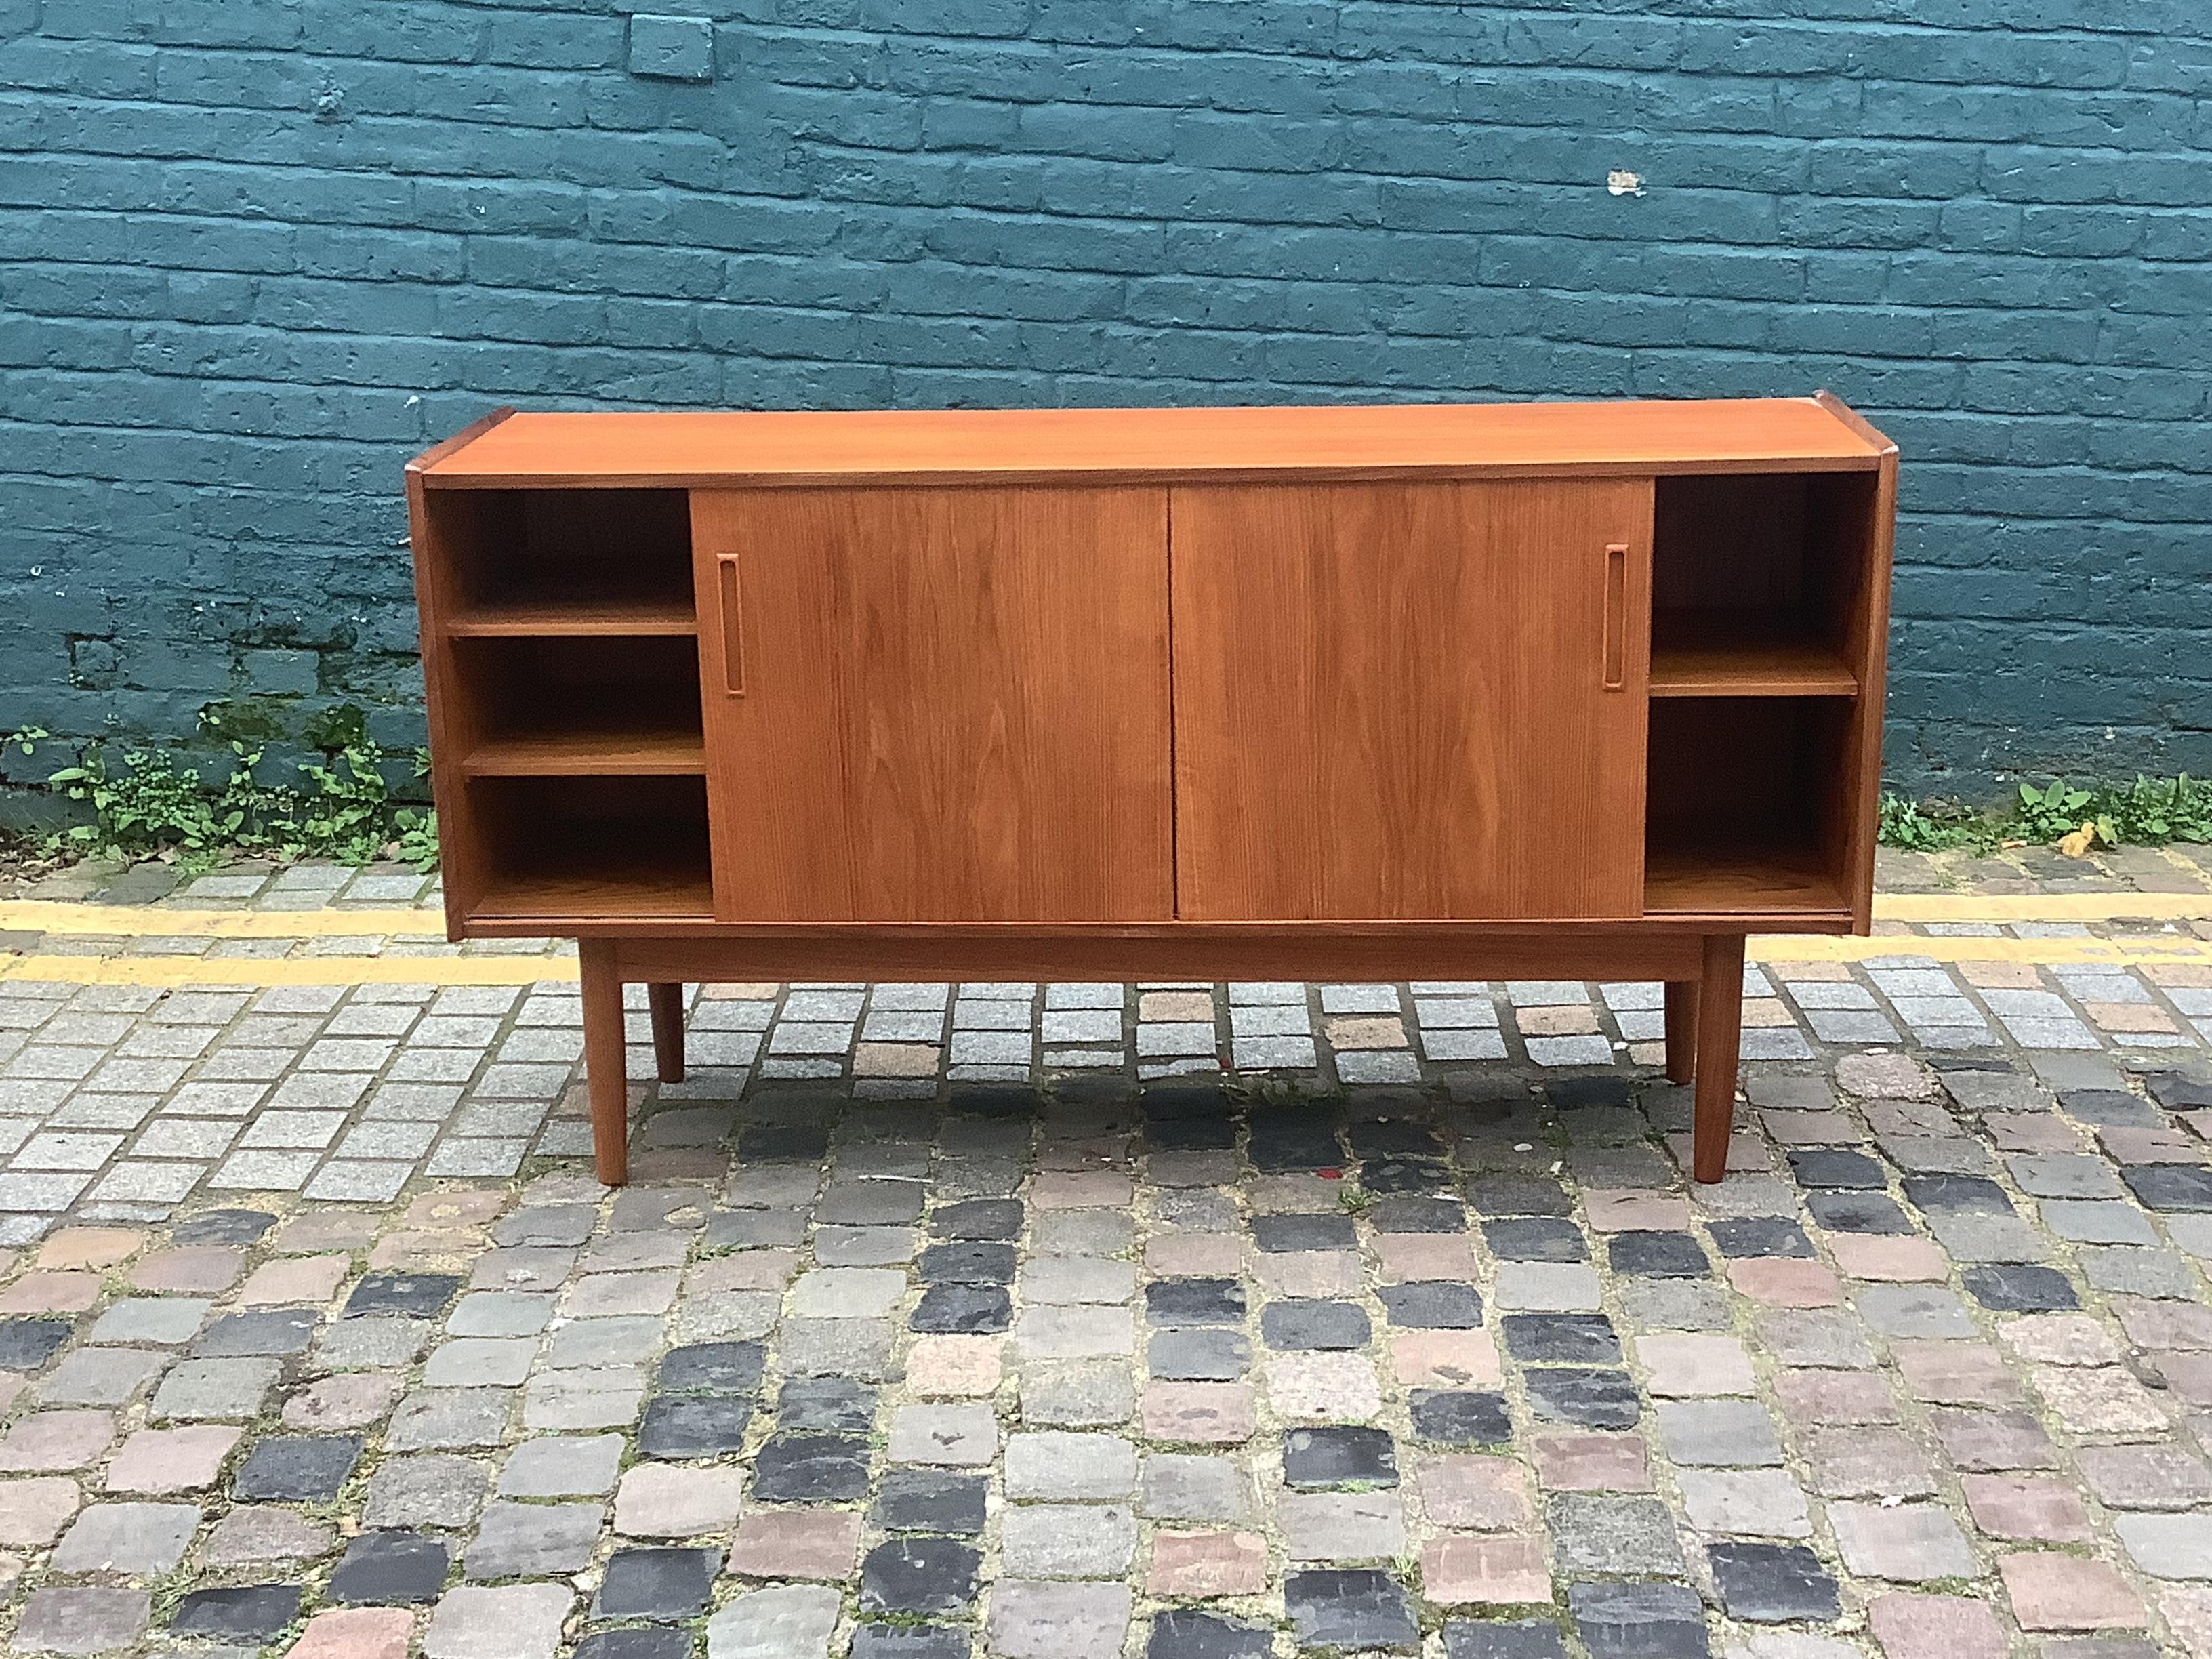 Stylist teak sideboard with useful storage shelves with sliding doors
Sitting on lovely tapered wooden legs Cc1960 Danish 